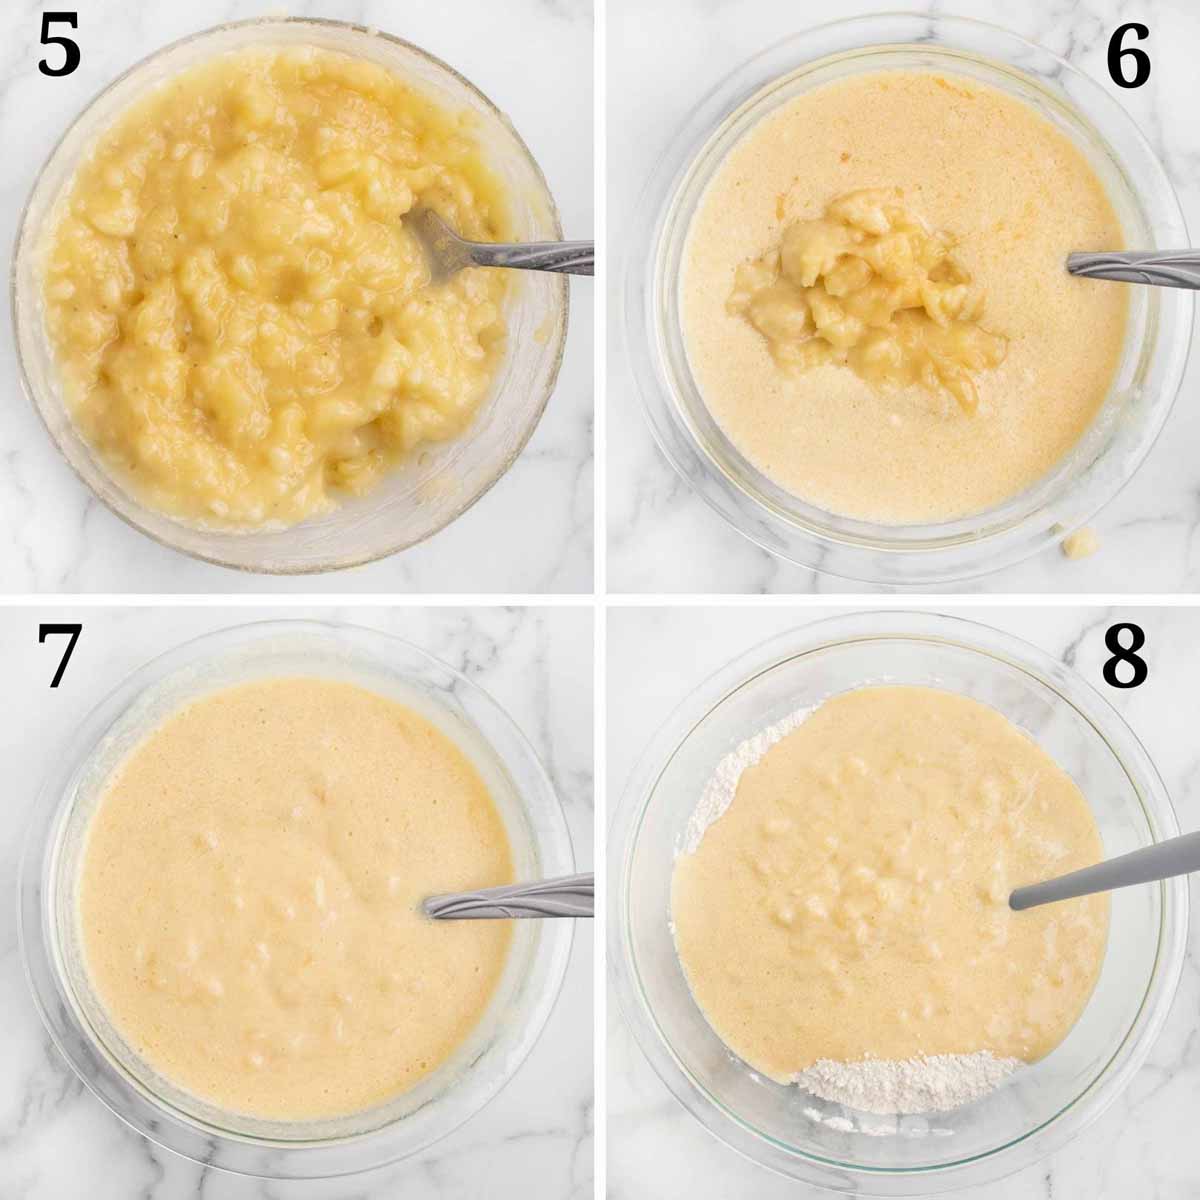 four images showing the next steps in making the banana cake batter